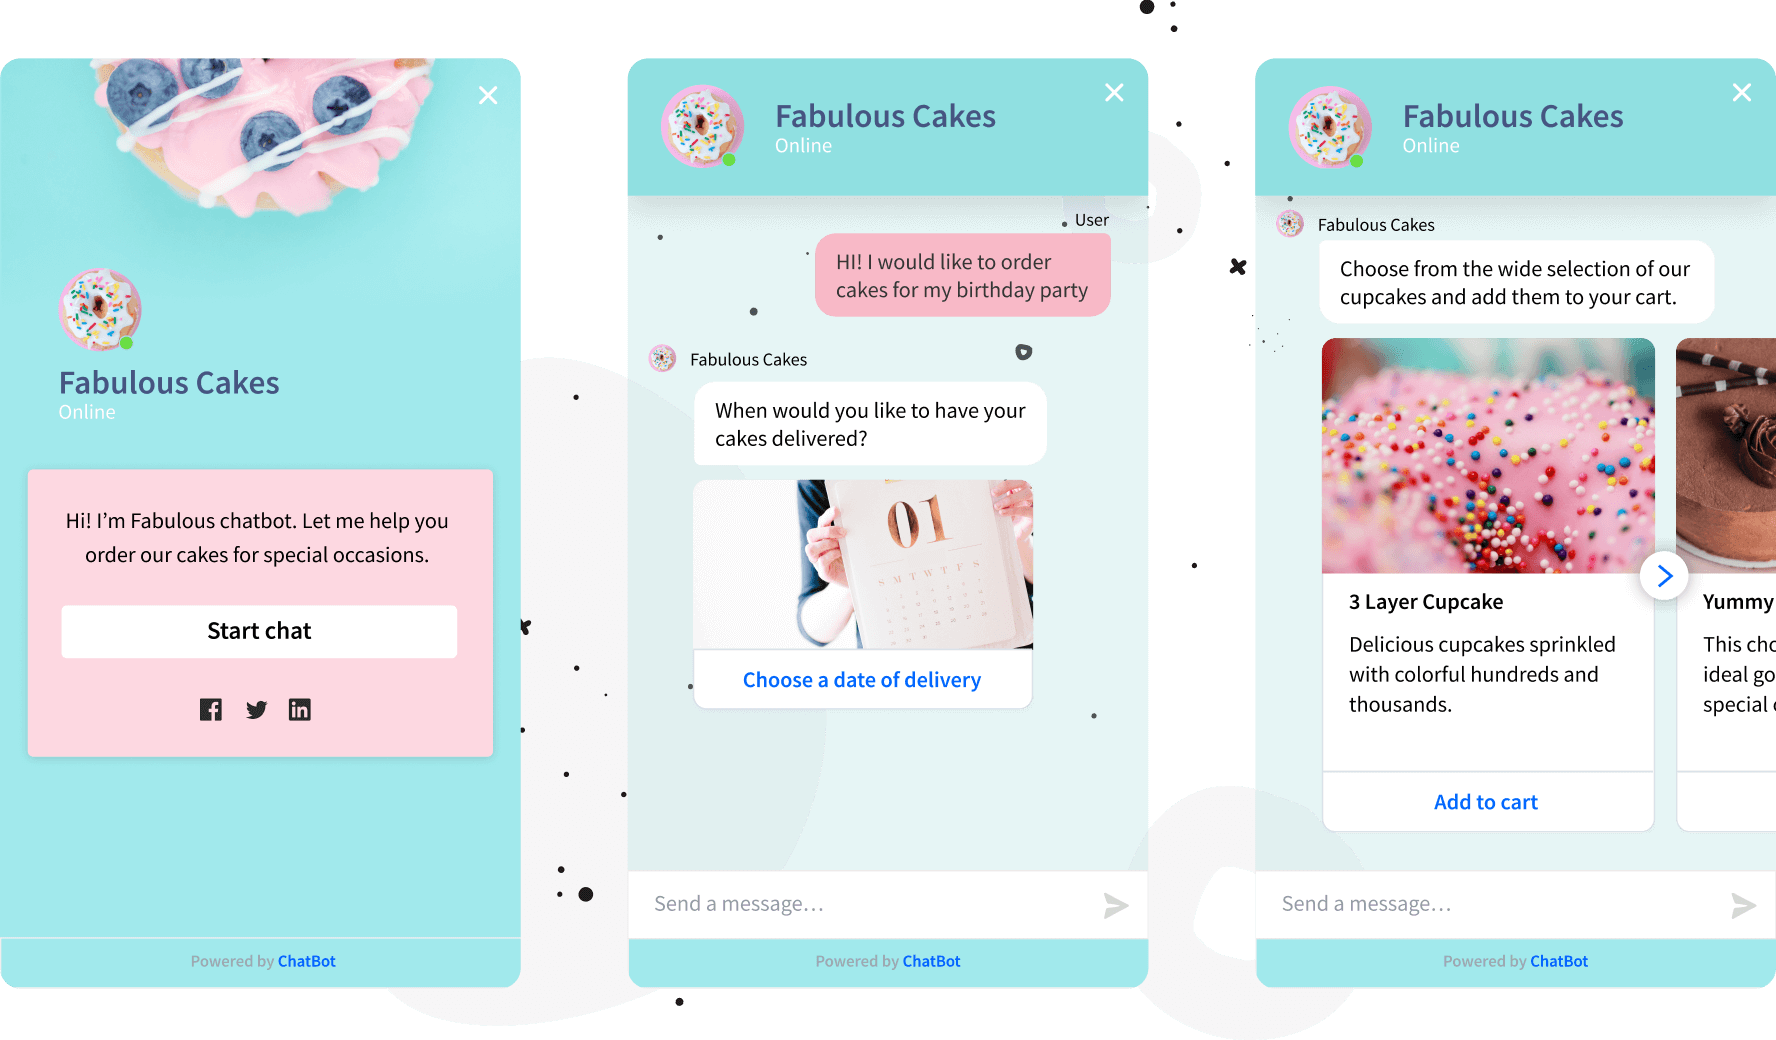 The gallery of chatbots